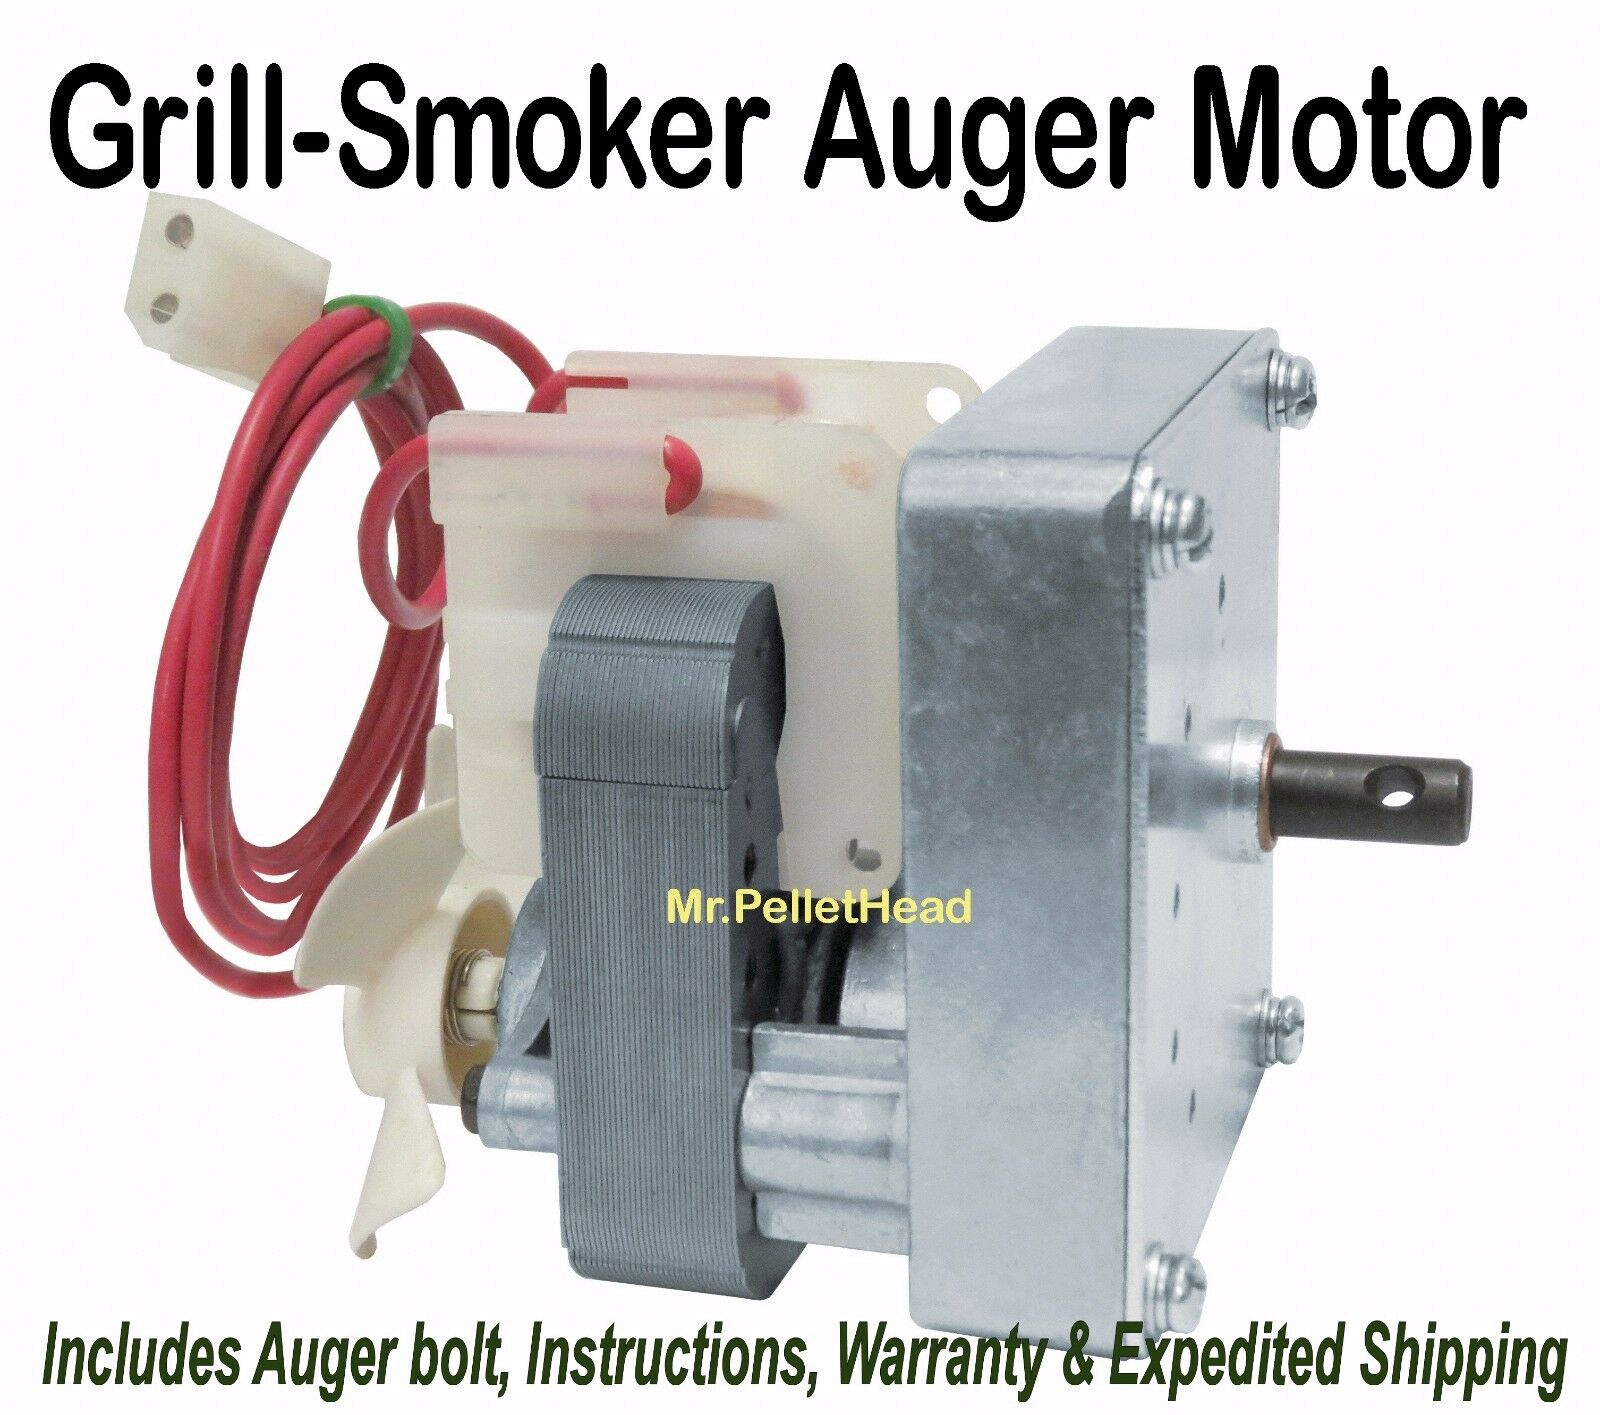 Replacement Auger Motor [cc-xp7252] For Camp Chef Wood Pellet Grills- Smokers